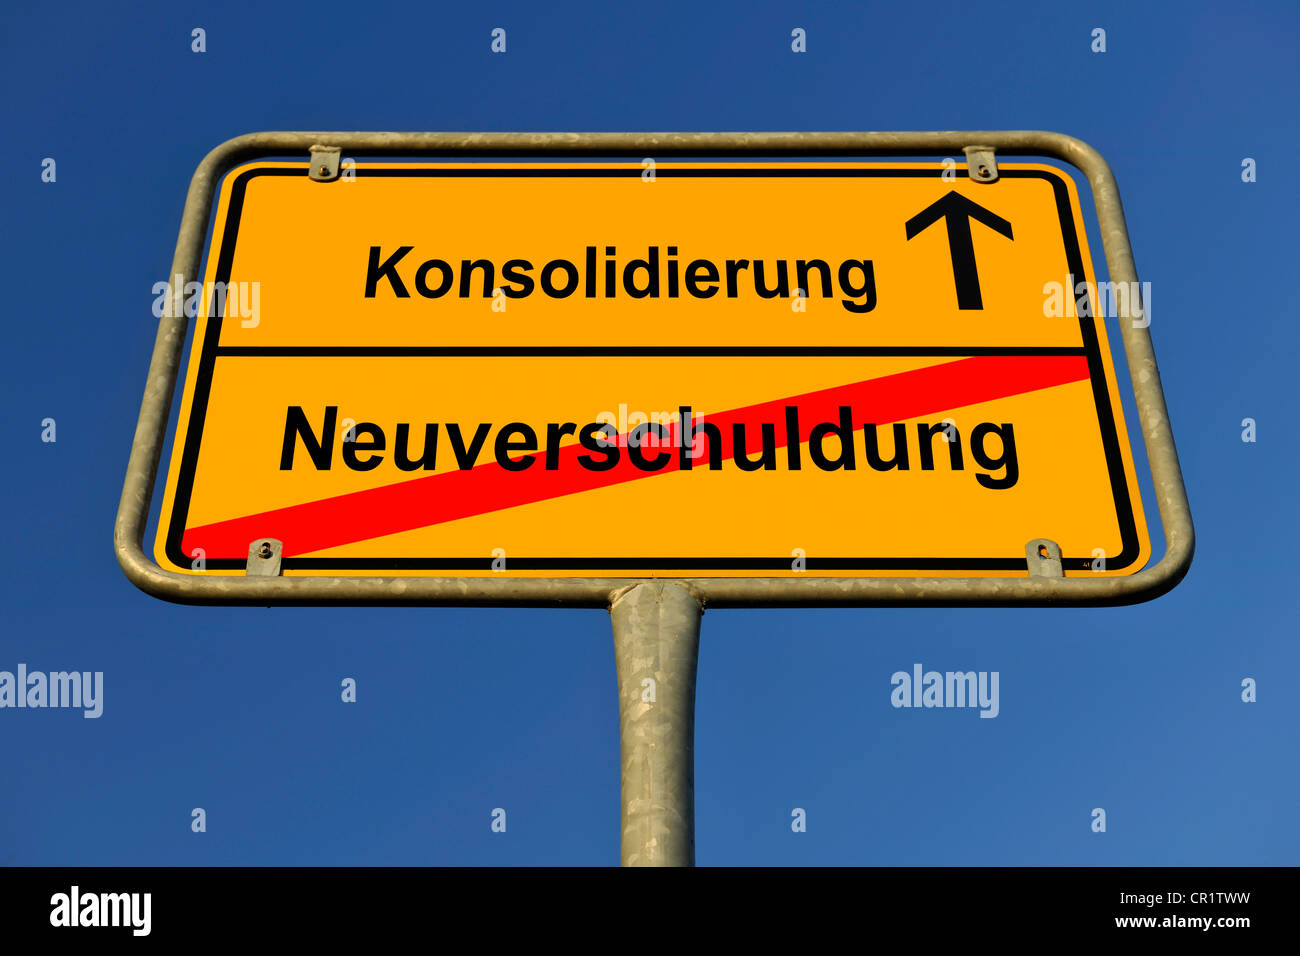 Town city, city limits, Konsolidierung and Neuverschuldung, German for consolidation and new indebtedness, symbolic image for Stock Photo